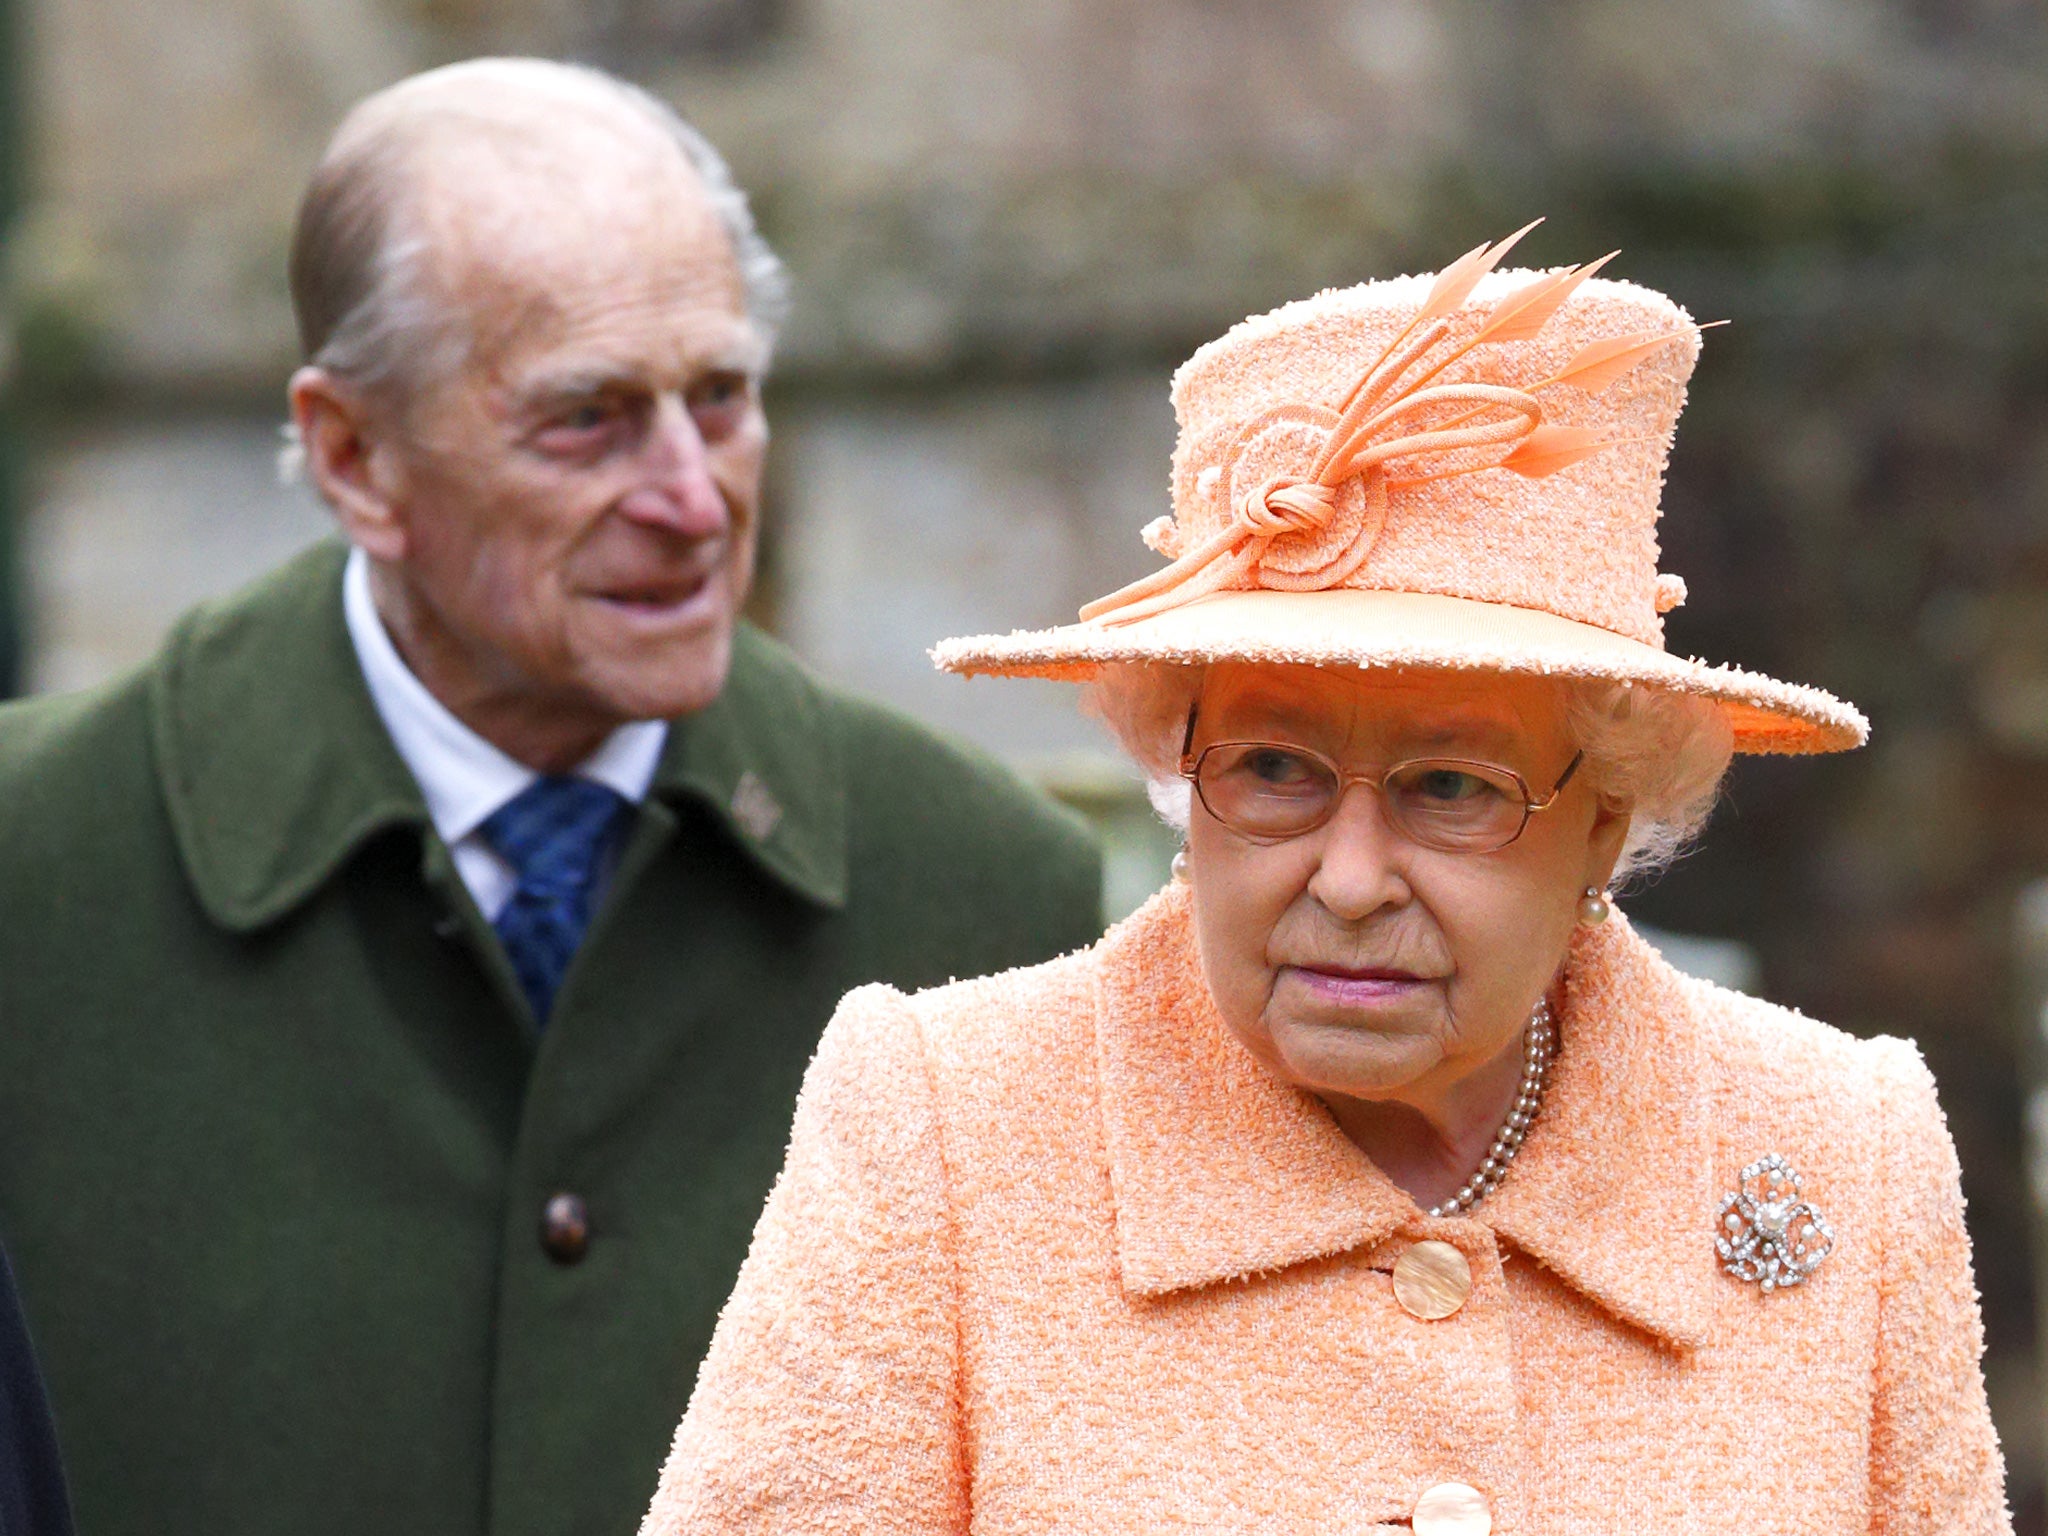 The Queen has no control over the Crown Estate but receives 15 per cent of its profits from the Treasury